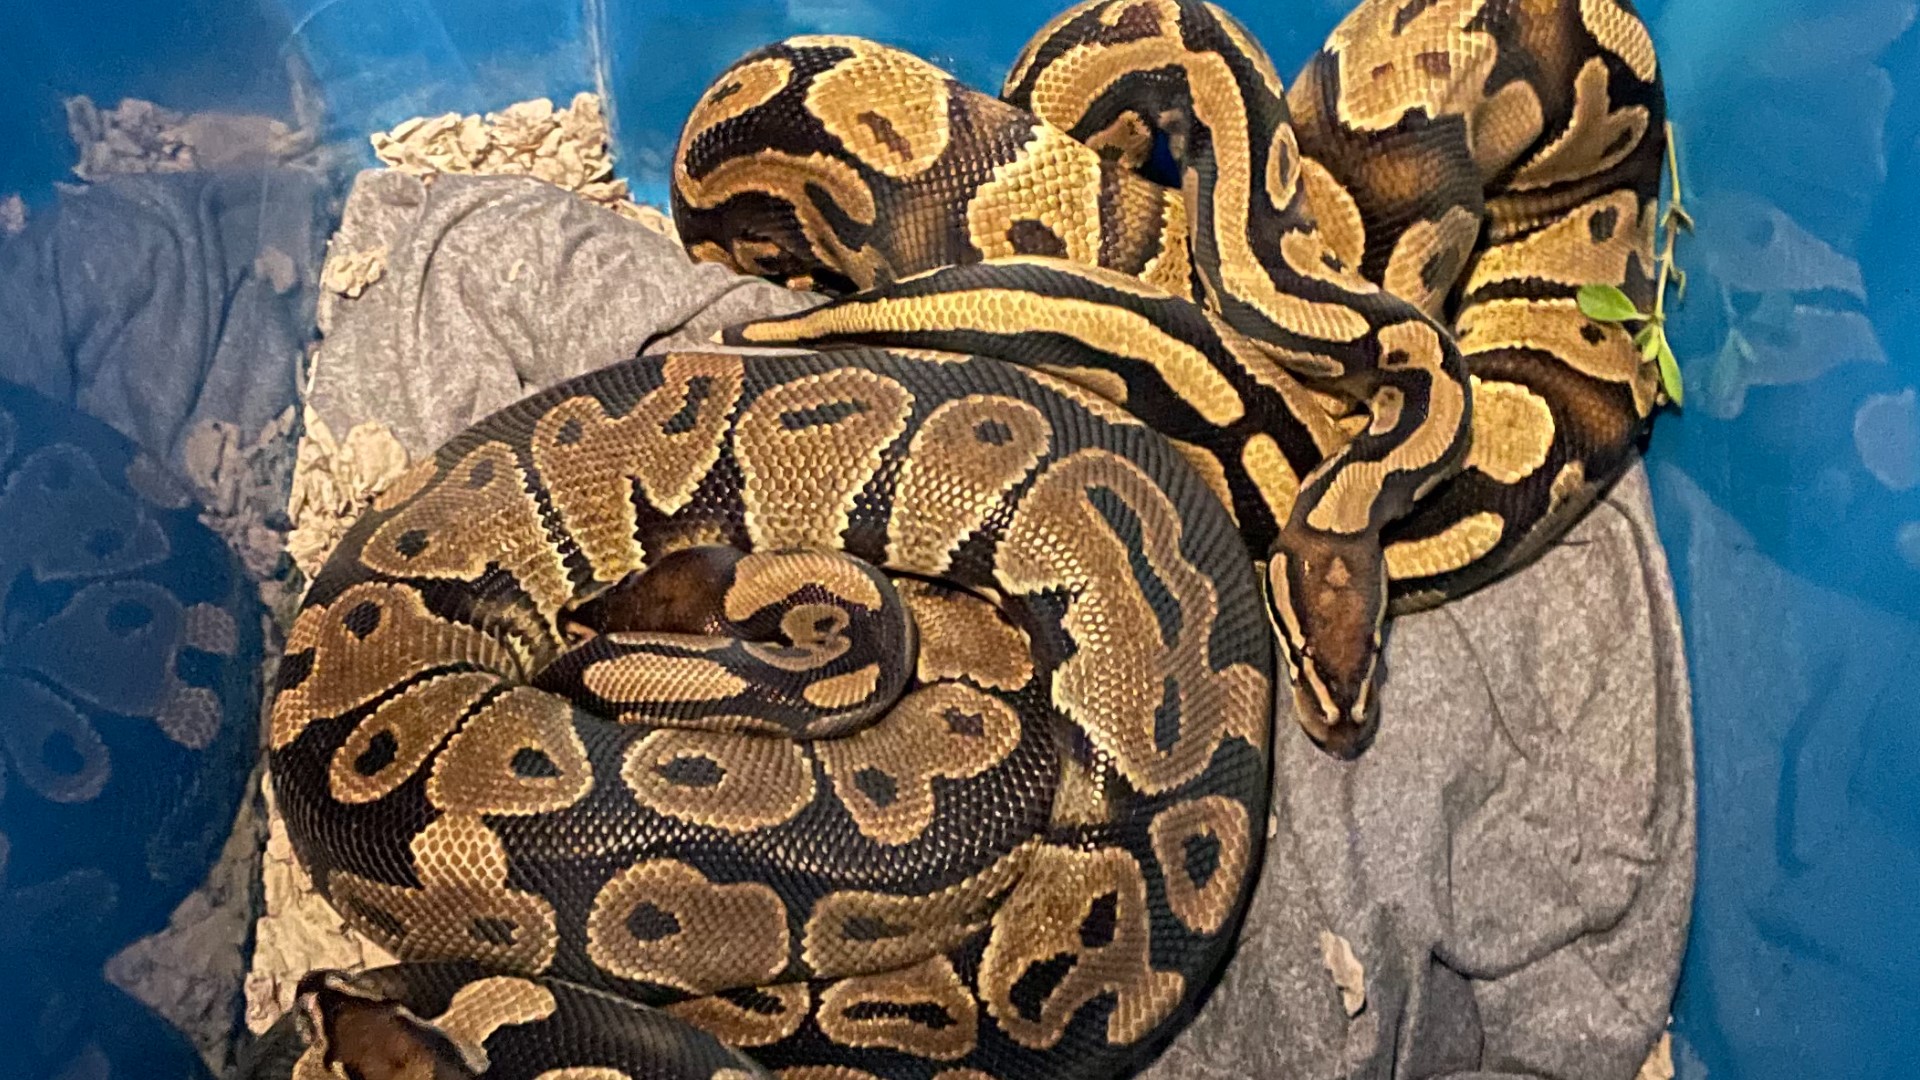 Residents of St. Augustine's Prairie Lakes neighborhood say they've captured 20+ ball pythons roaming the neighborhood in July. It's not known where they came from.